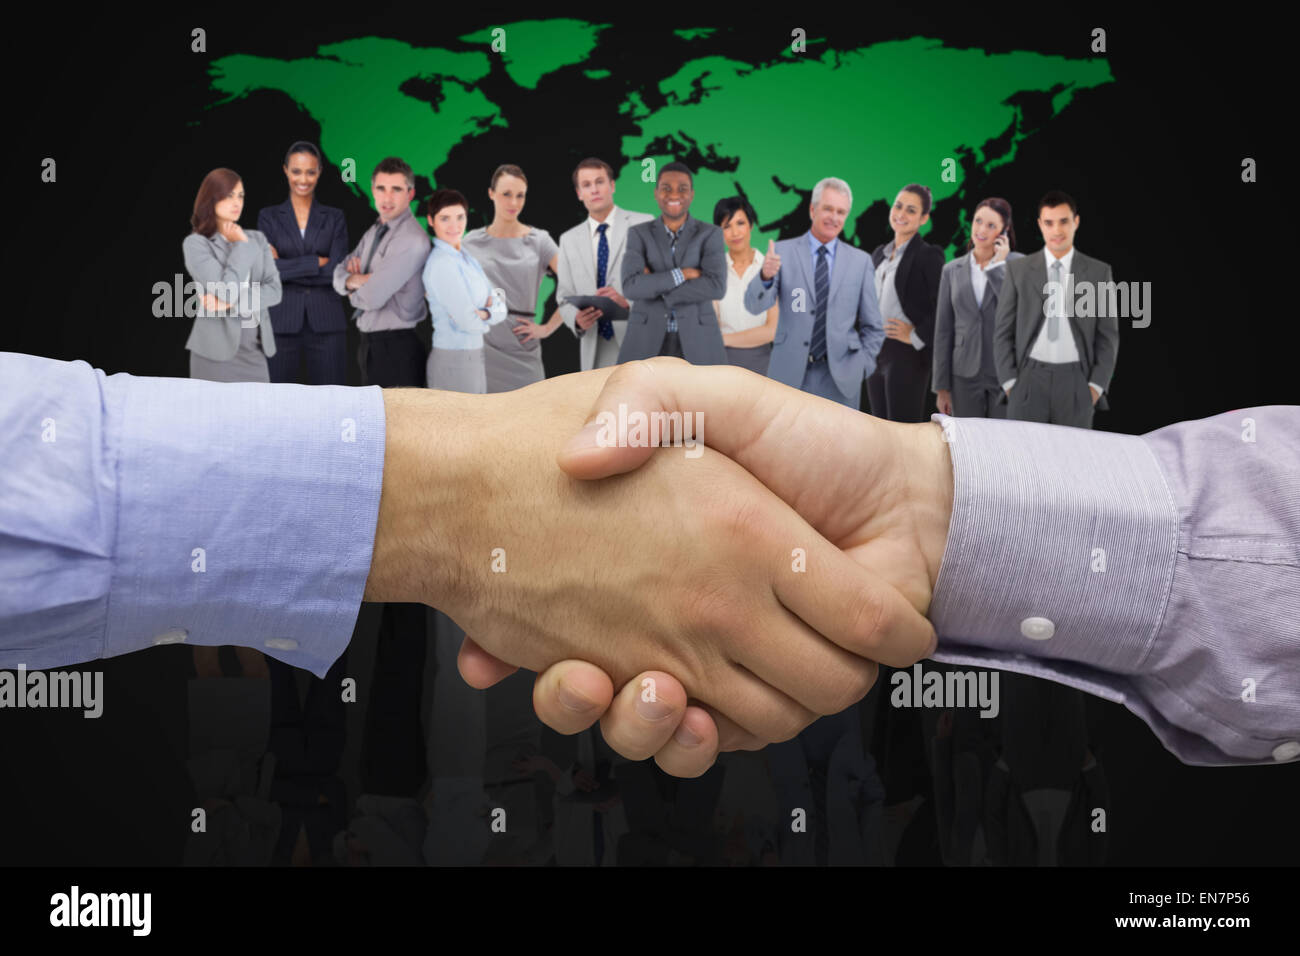 Composite image of hand shake in front of wires Stock Photo